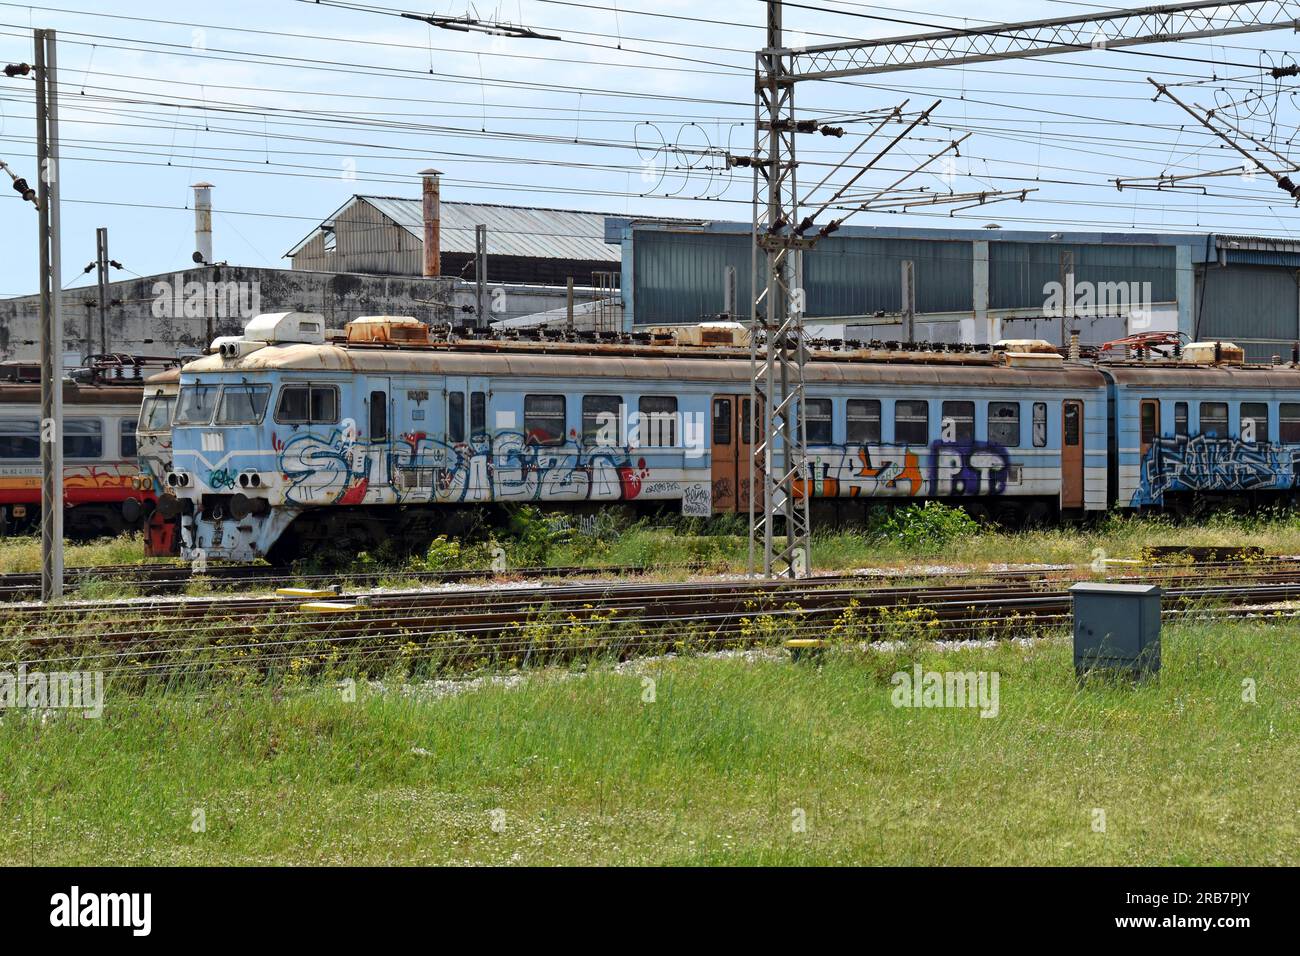 Derelict and disused railway carriages in the depot at Podgorica Railway Station, Montenmegro Stock Photo